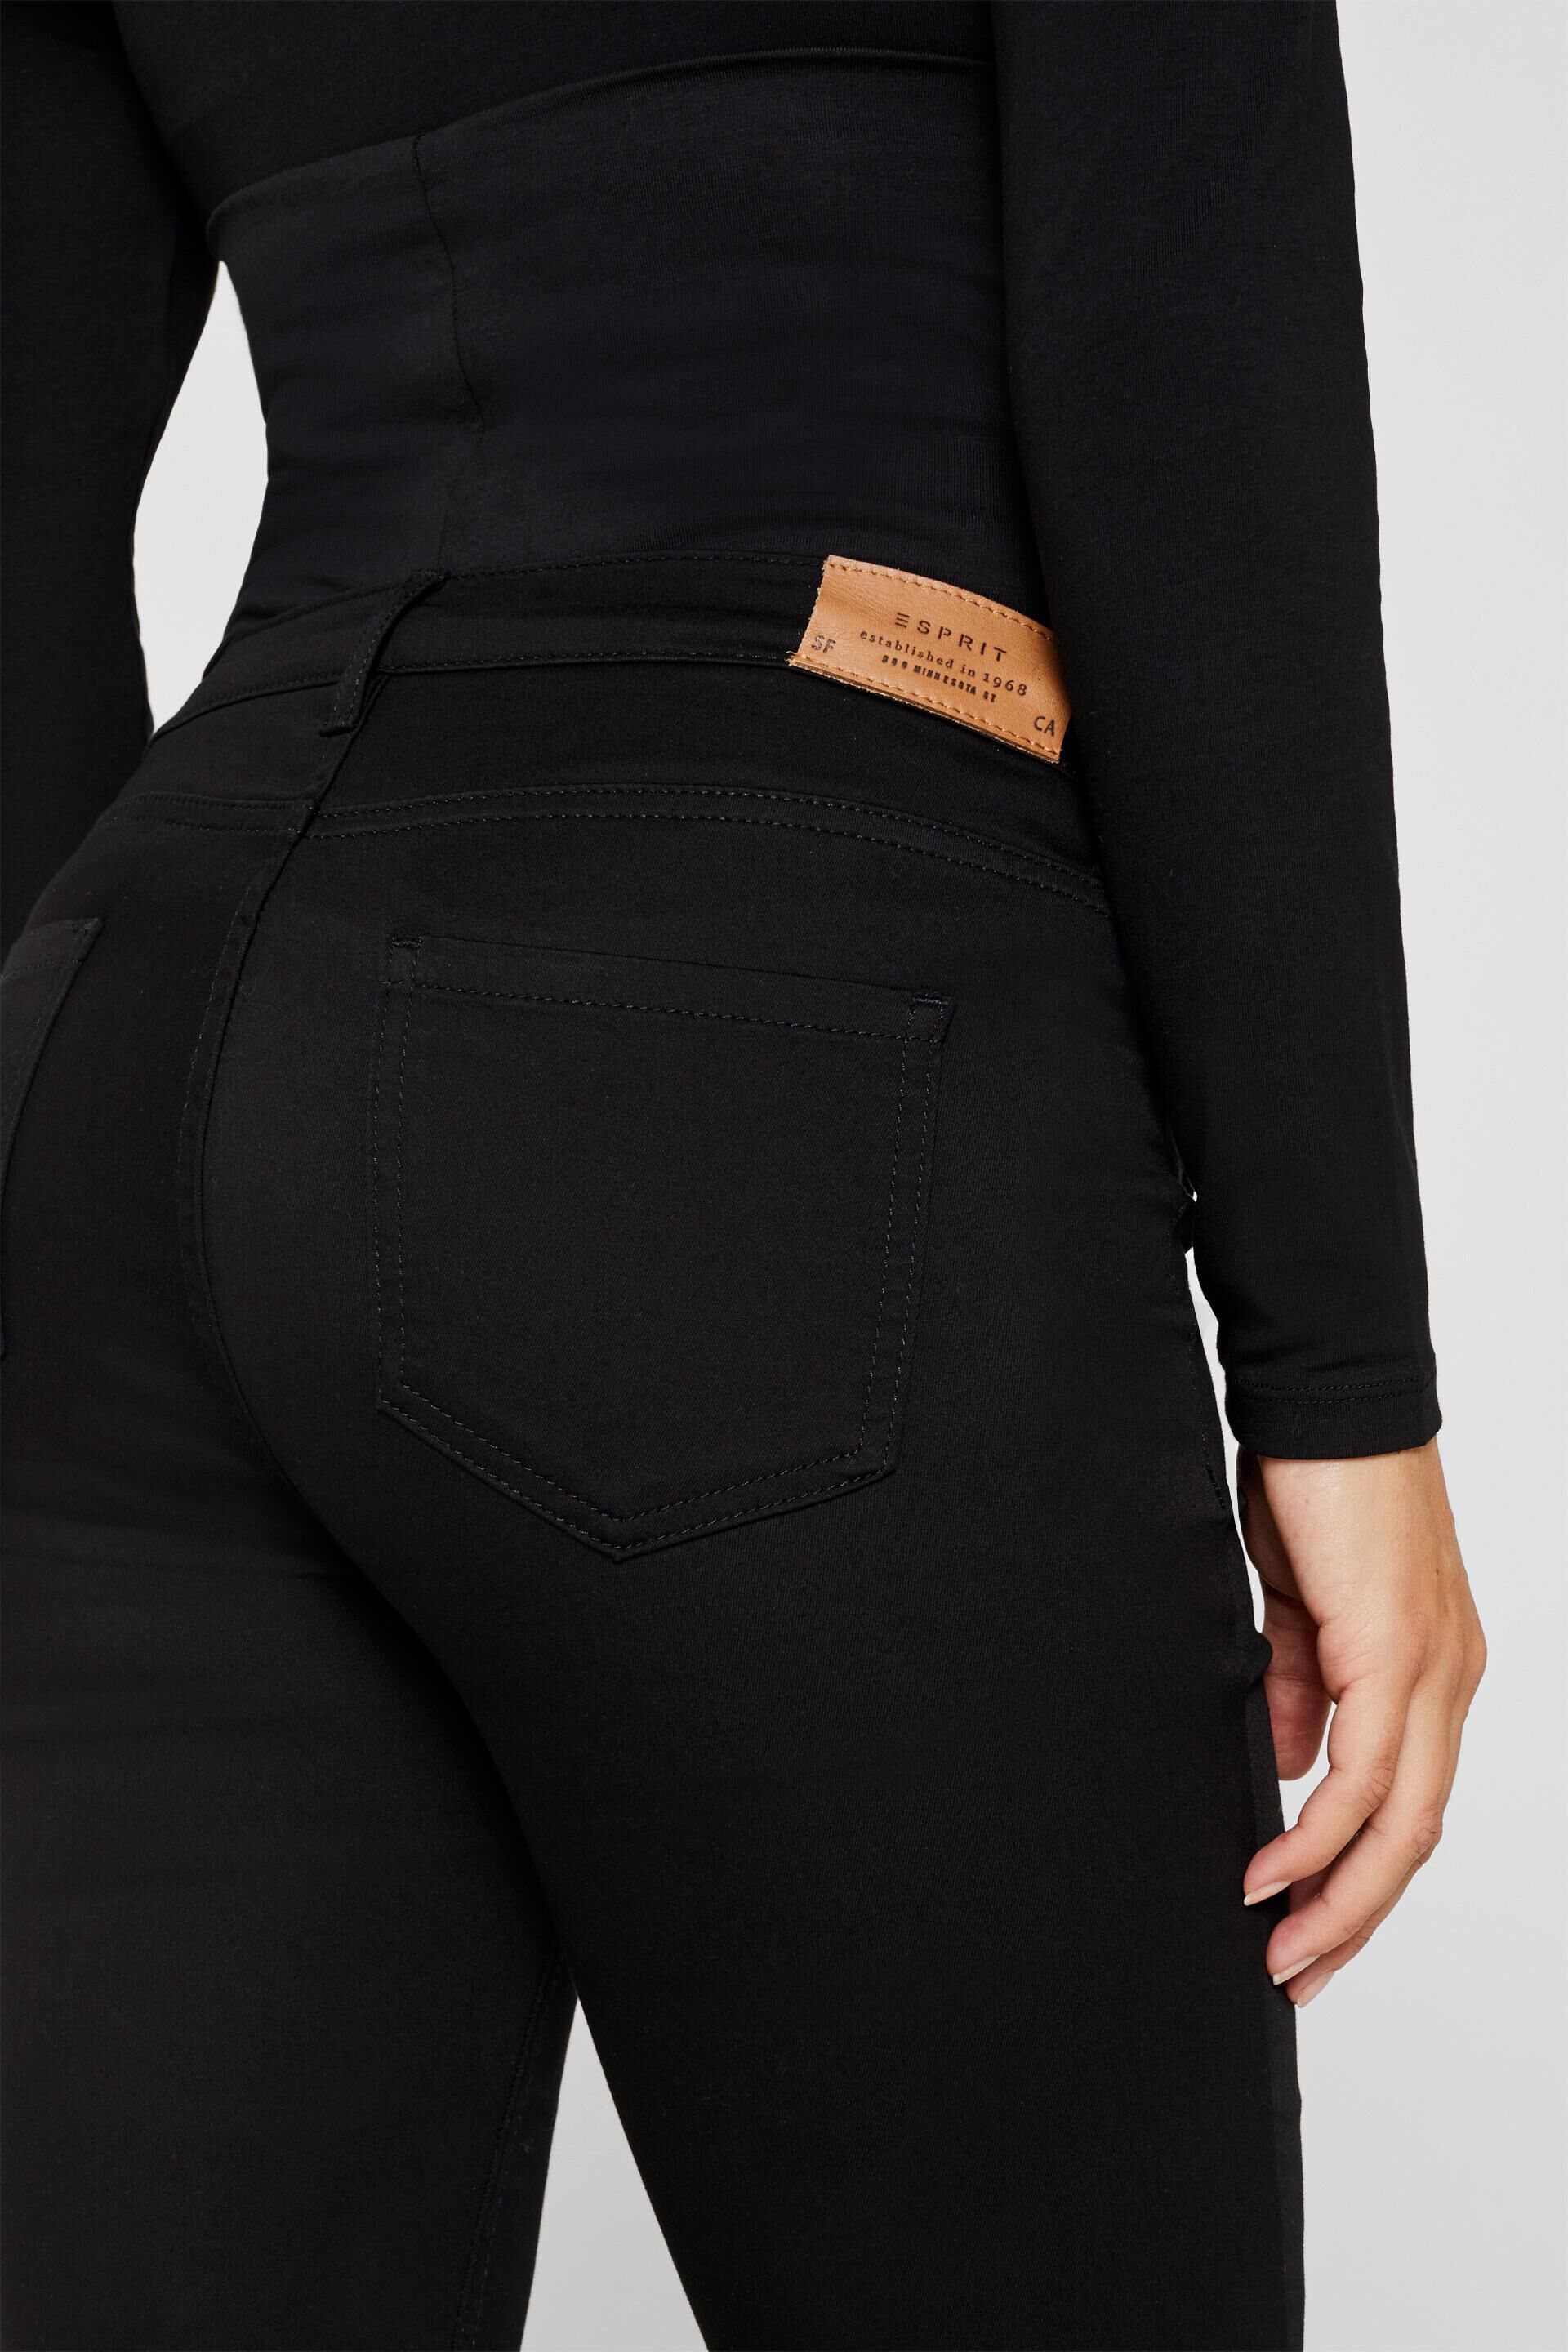 Shop Esprit Stretch trousers with an over-bump waistband